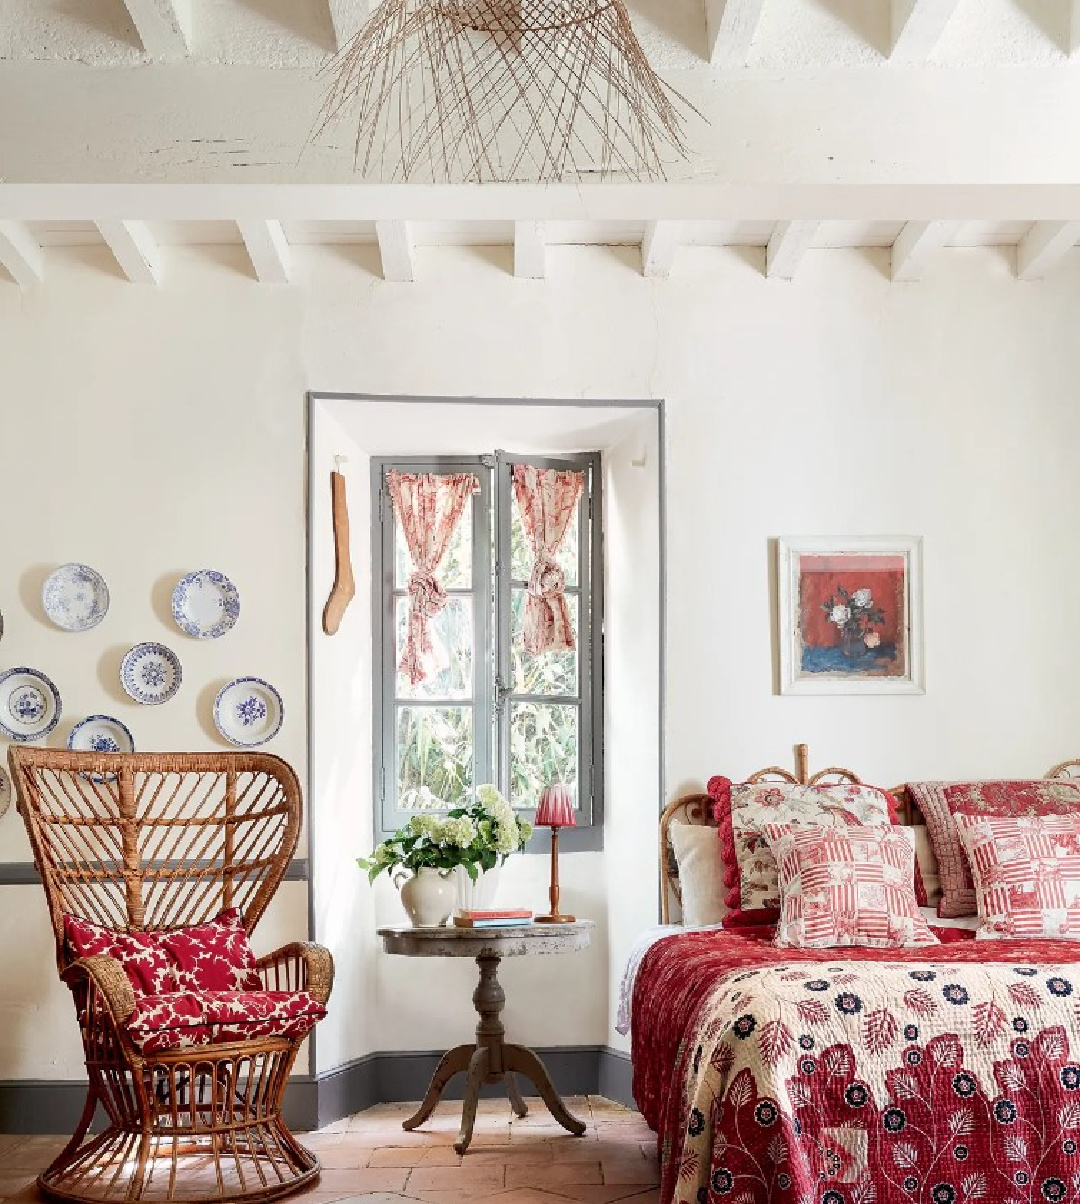 Colorful red eclectic interior in a 19th century French cottage in Toulouse by Lucinda Chambers - photo by Paul Massey. #frenchcottage #frenchfarmhouse #interiordesign